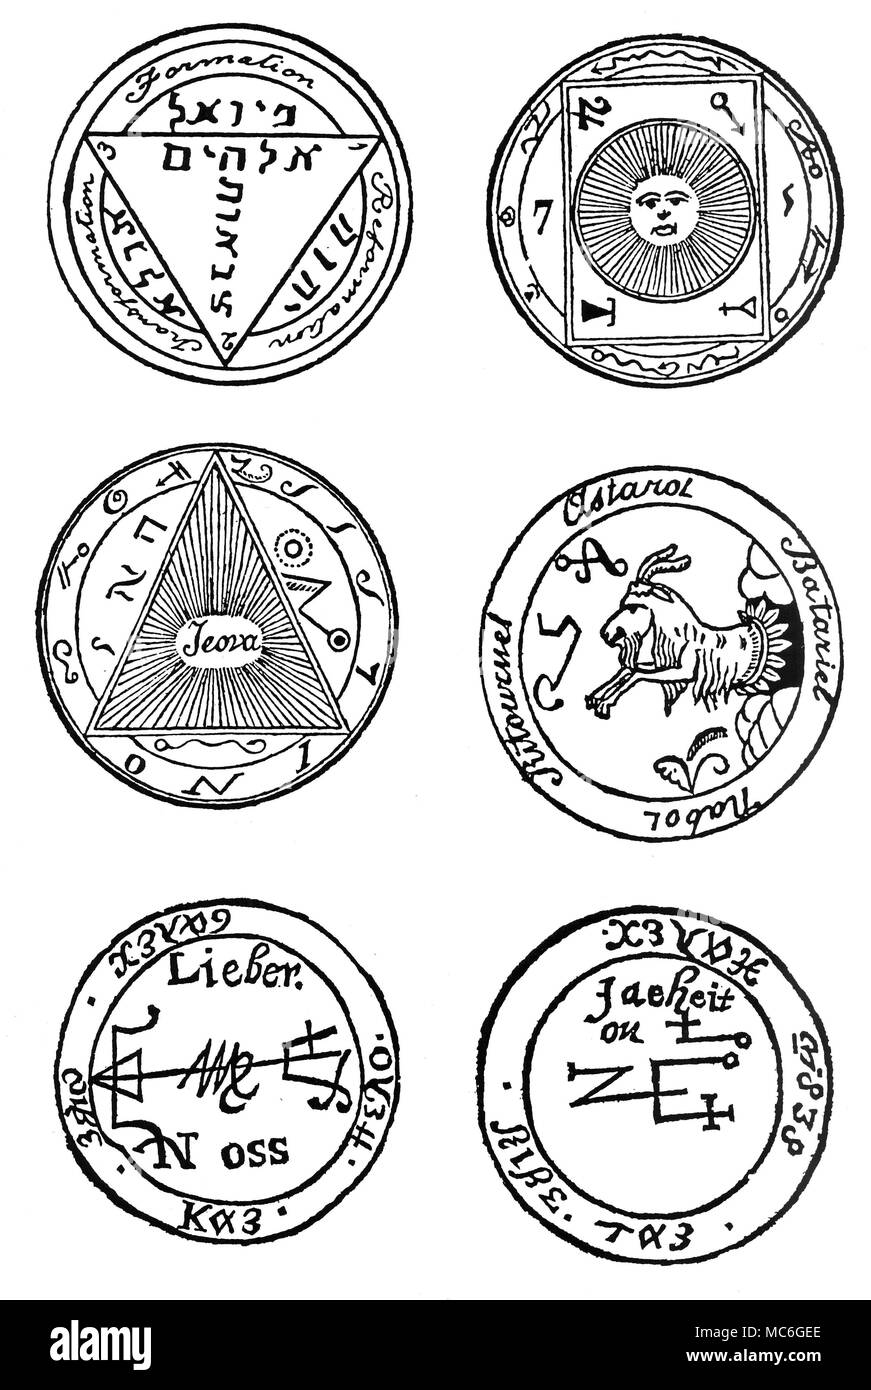 GRIMOIRES - TALISMANS Talismans are magical figures designed to achieve certain effects by spiritual means - usually by evoking the power of a particular angel or demon. Like the majority of talismans, the six recorded here are ultimately derived from the grimoire tradition. From top, reading left to right. Talisman from the Enchiridion of Pope Leo III. A talisman from the grimoire, The Sage of the Pyramids, recorded by A.E. Waite in The Book of Ceremonial Magic, is designed to grant invisibility to the possessor - supposedly, it also confers the ability to pass through solid walls: it Stock Photo